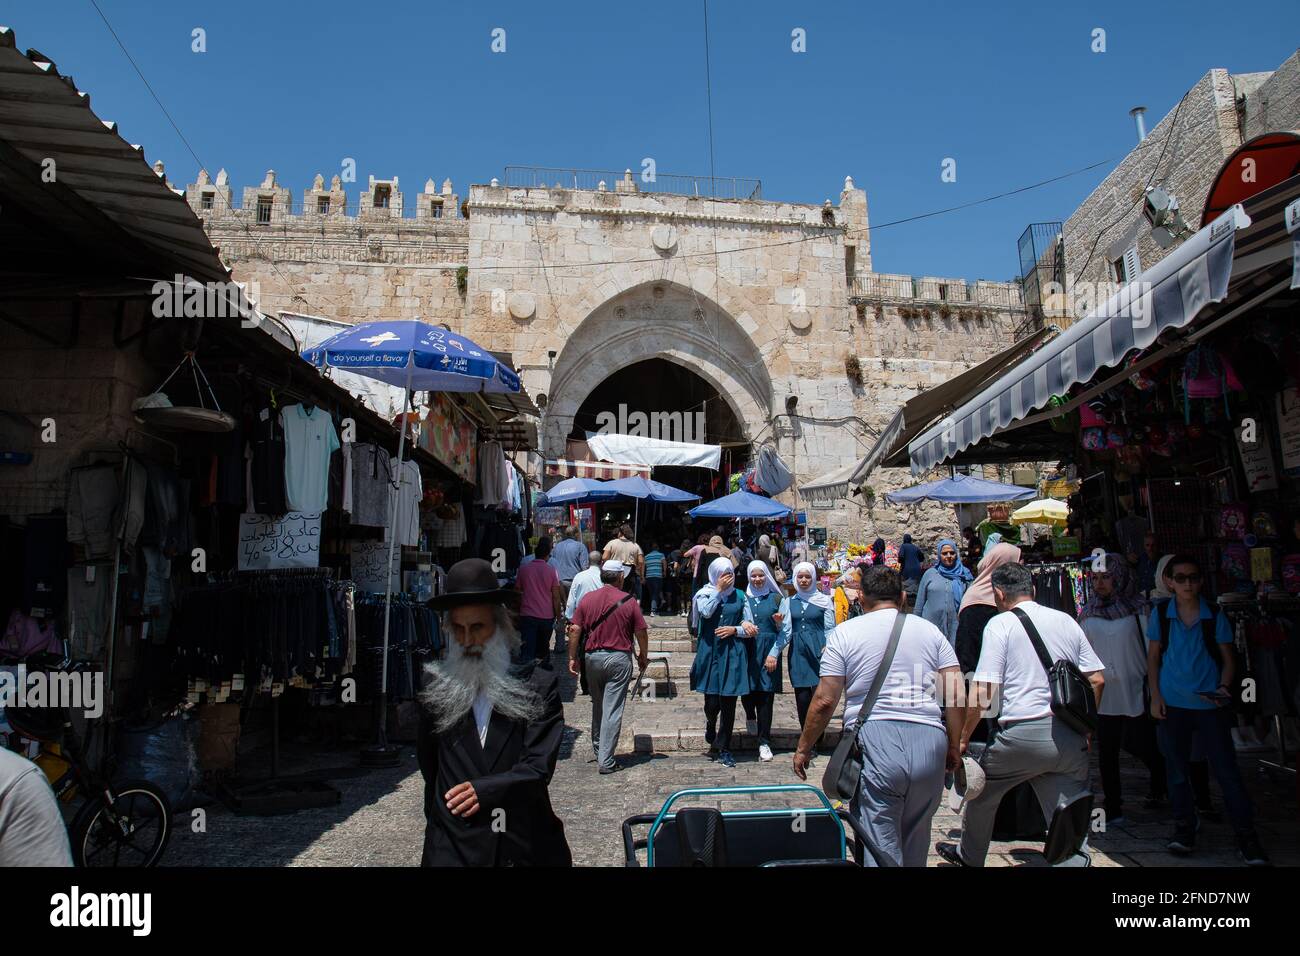 People walking Damascus Gate in the Muslim Quarter of the Old City of Jerusalem. Stock Photo